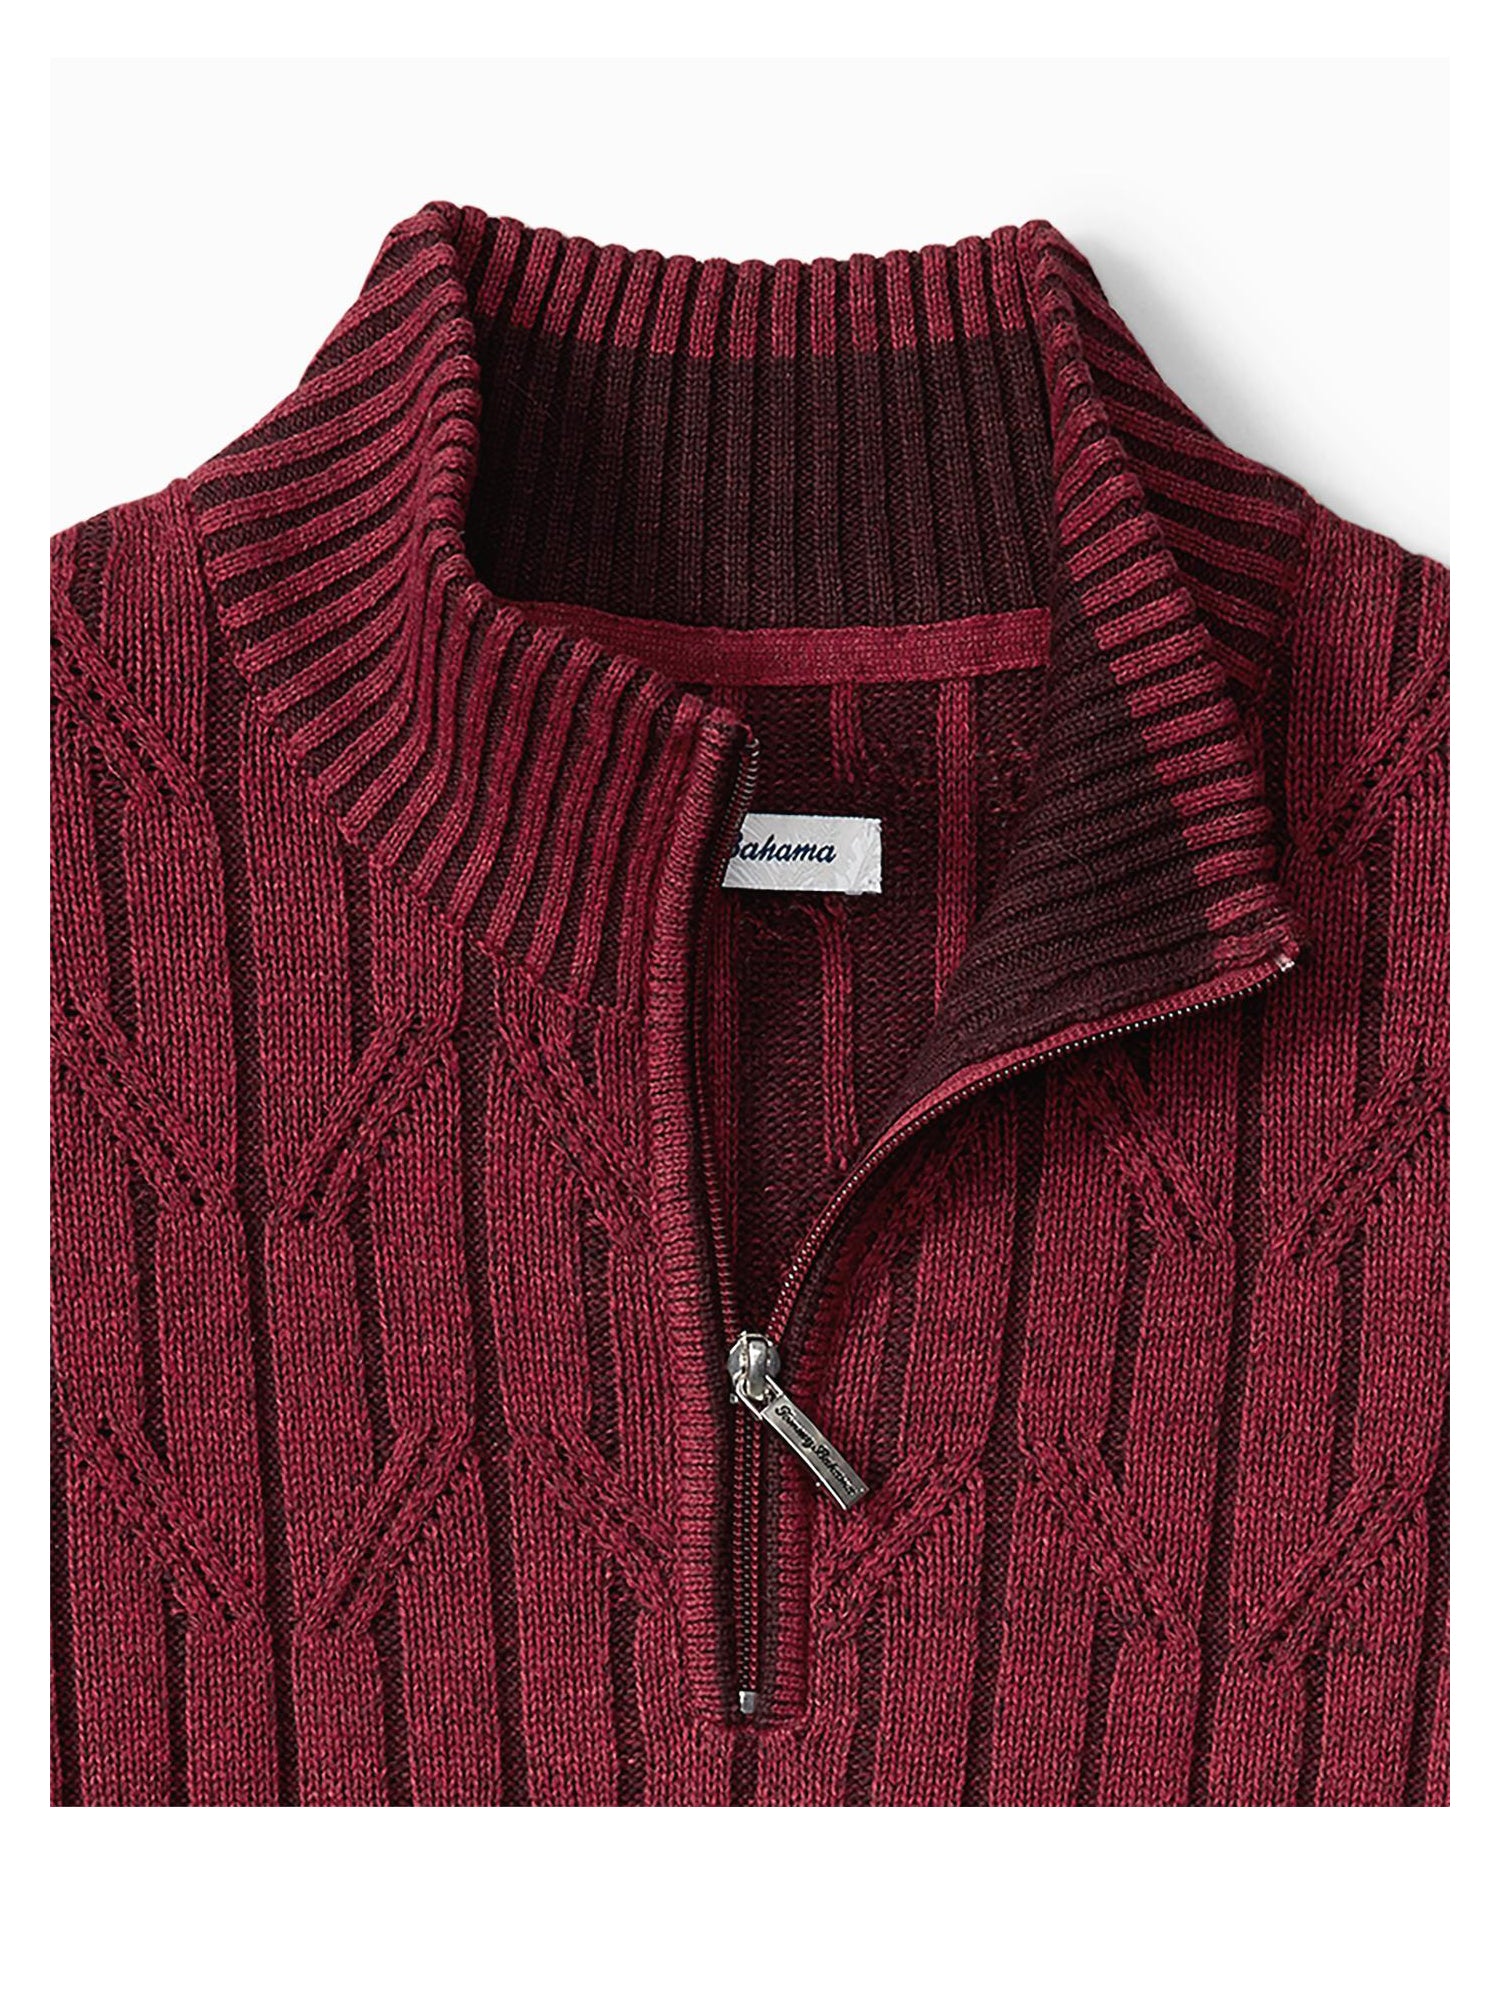 Tommy Bahama Deep Sea Half Zip Cable Sweater in Cherry Stone